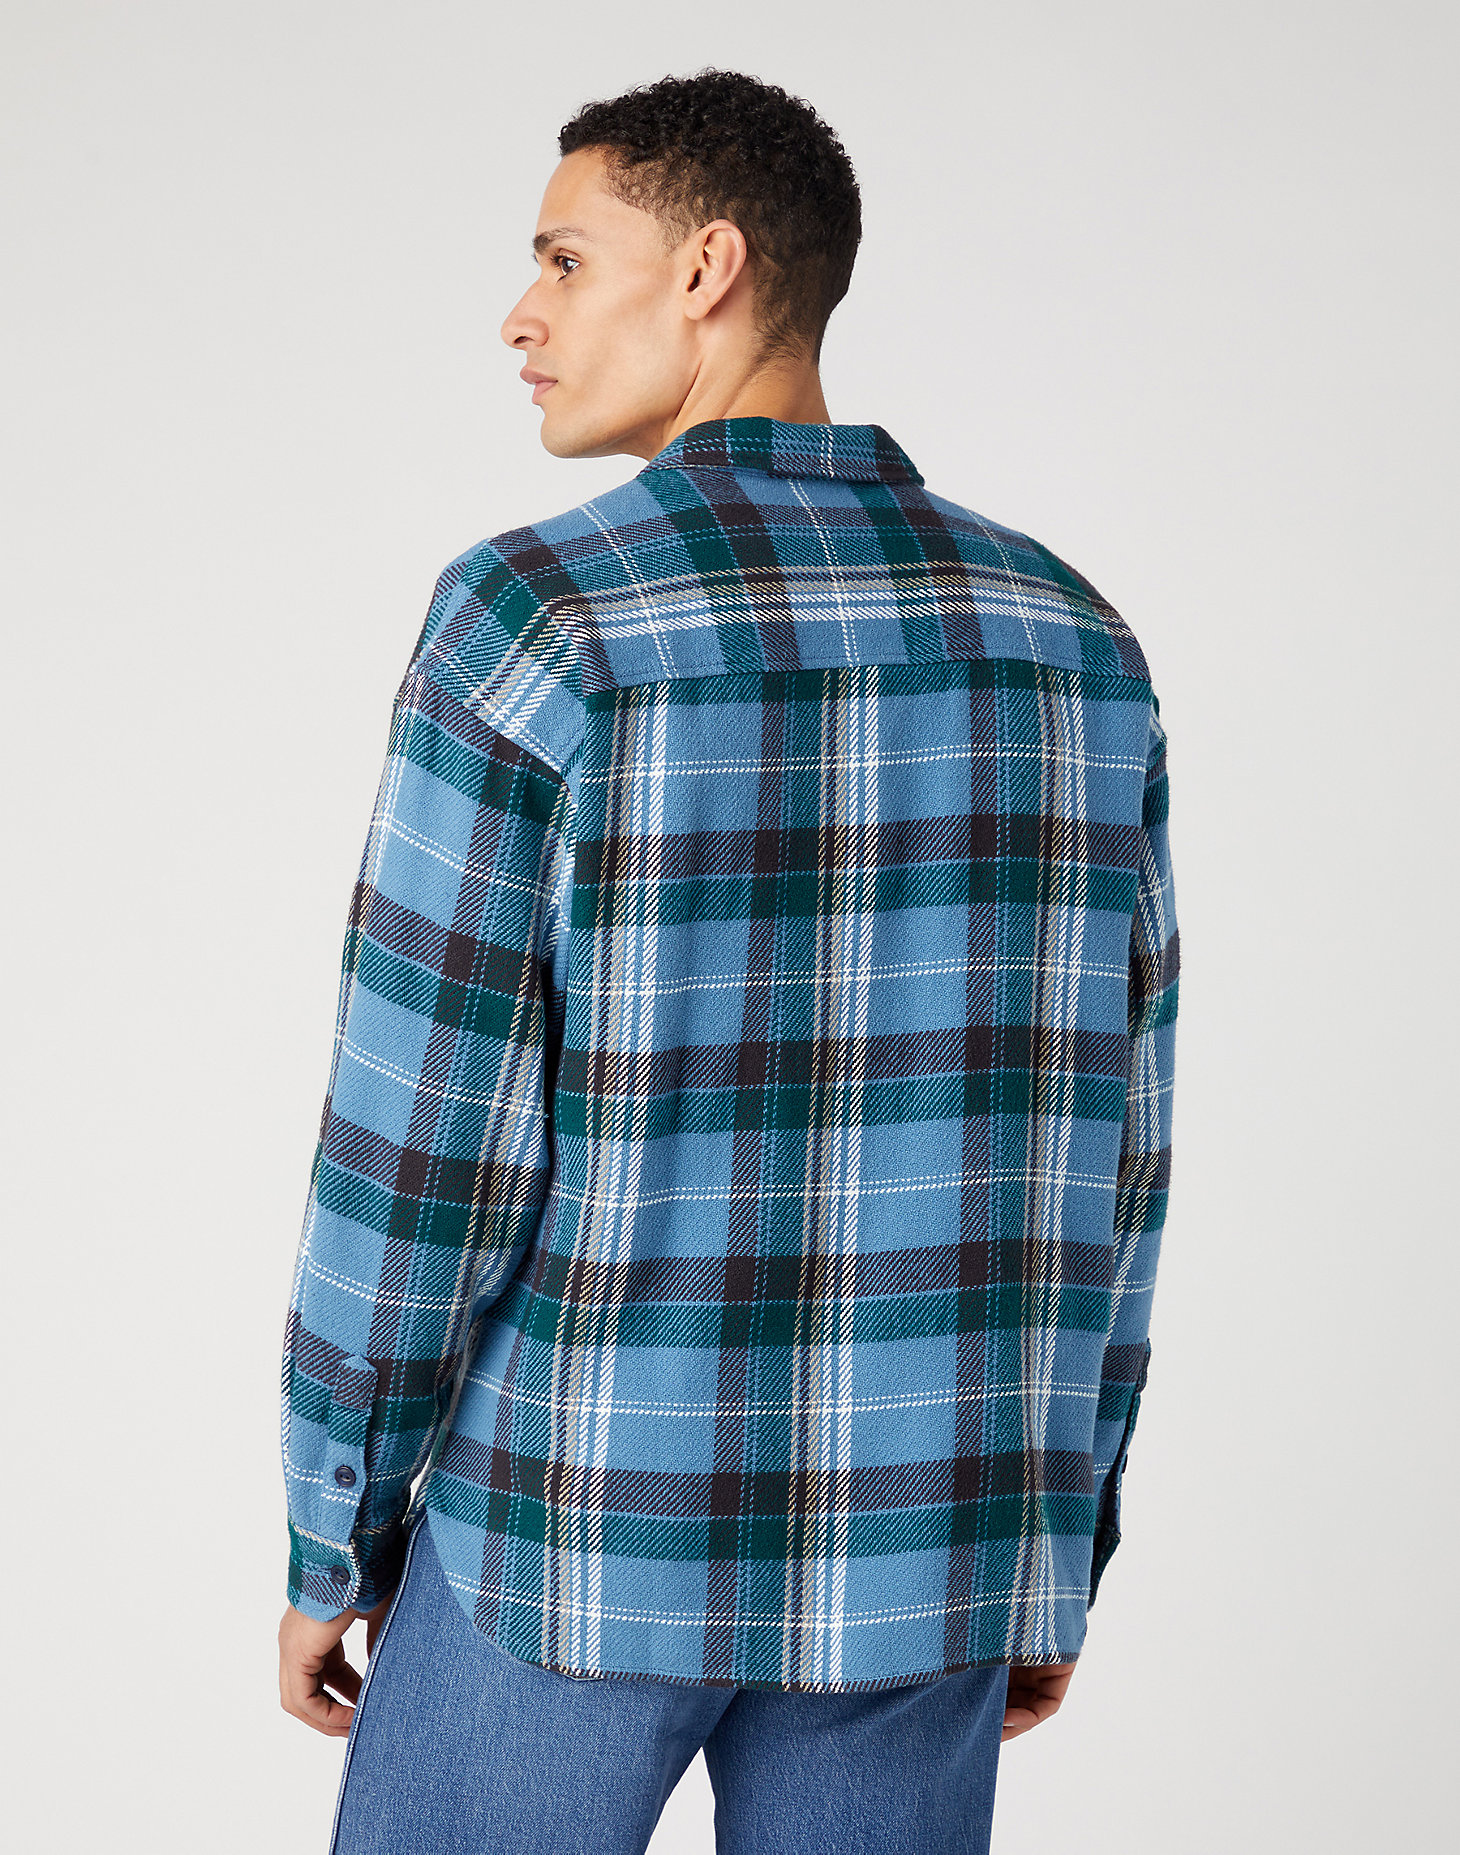 Overshirt in Captains Blue alternative view 2